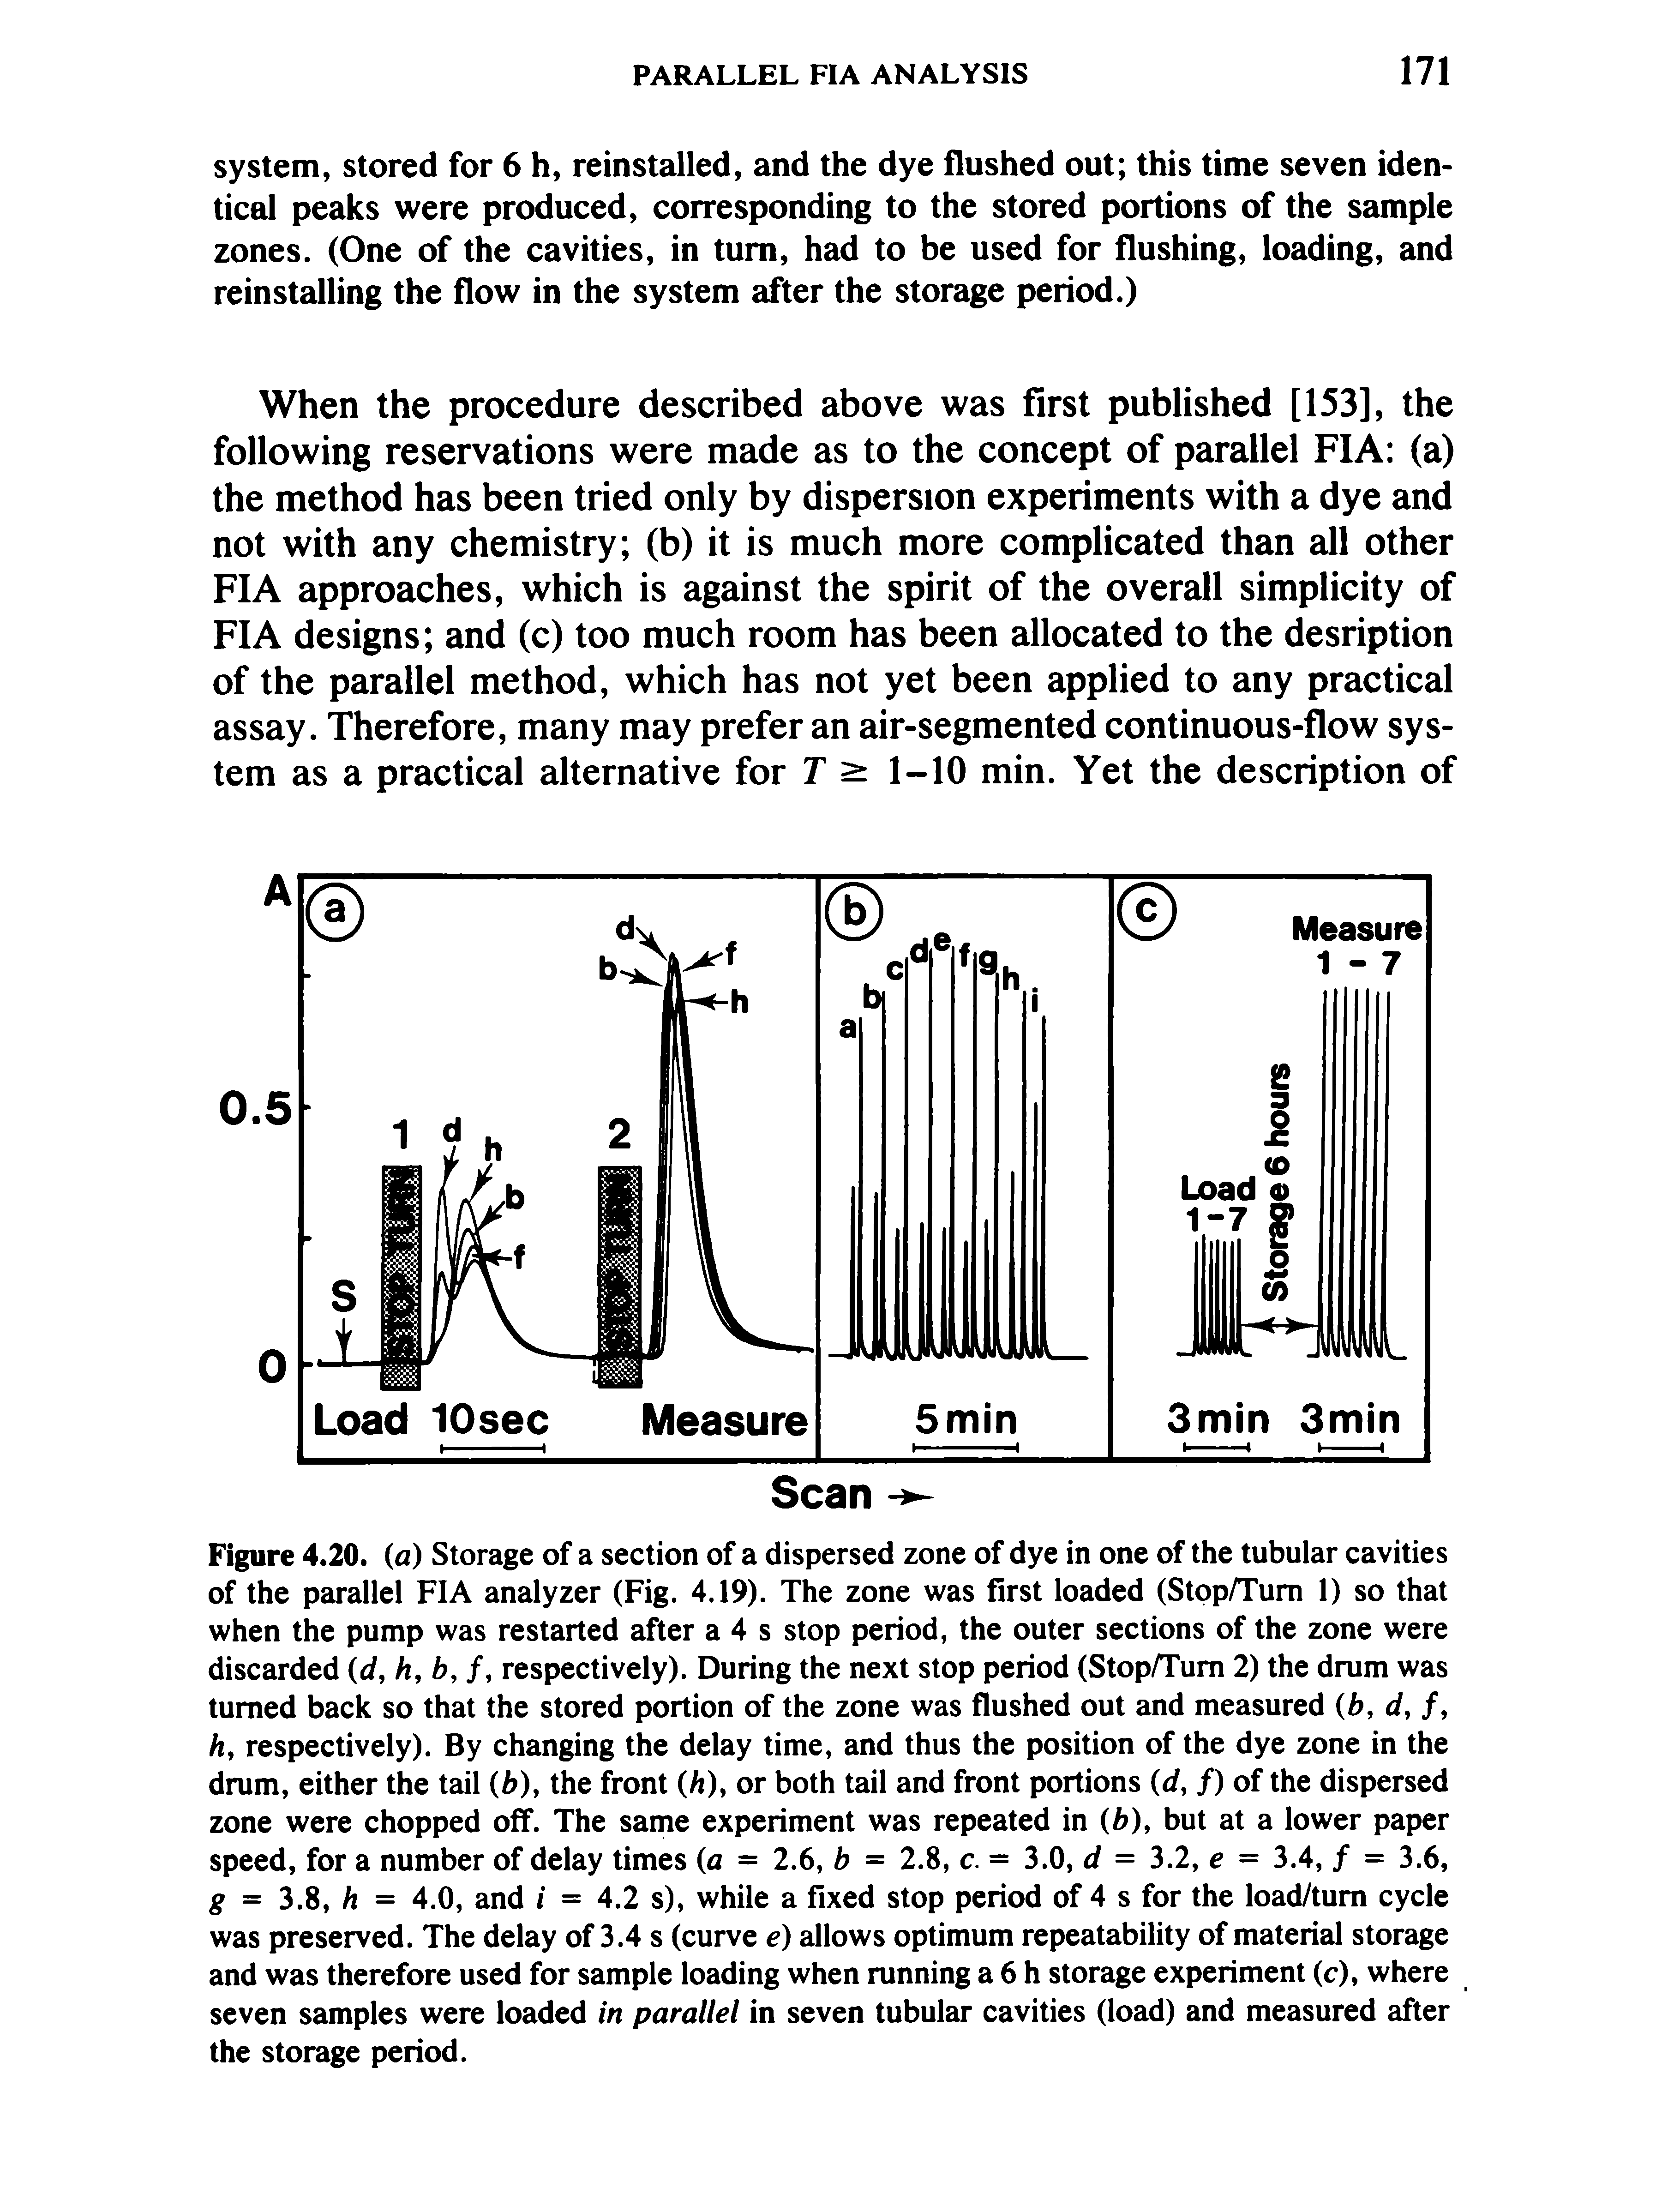 Figure 4.20. (a) Storage of a section of a dispersed zone of dye in one of the tubular cavities of the parallel FIA analyzer (Fig. 4.19). The zone was first loaded (Stpp/Tum 1) so that when the pump was restarted after a 4 s stop period, the outer sections of the zone were discarded (d, h, b, /, respectively). During the next stop period (Stop/Tum 2) the drum was turned back so that the stored portion of the zone was flushed out and measured (6, d, /, h, respectively). By changing the delay time, and thus the position of the dye zone in the drum, either the tail (6), the front (/i), or both tail and front portions d, f) of the dispersed zone were chopped off. The same experiment was repeated in (b), but at a lower paper speed, for a number of delay times a = 2.6, b = 2.8, c. = 3.0, d = 3.2, e - 3.4, / = 3.6, g = 3.8, h = 4.0, and / = 4.2 s), while a fixed stop period of 4 s for the load/tum cycle was preserved. The delay of 3.4 s (curve e) allows optimum repeatability of material storage and was therefore used for sample loading when running a 6 h storage experiment (c), where seven samples were loaded in parallel in seven tubular cavities (load) and measured after the storage period.